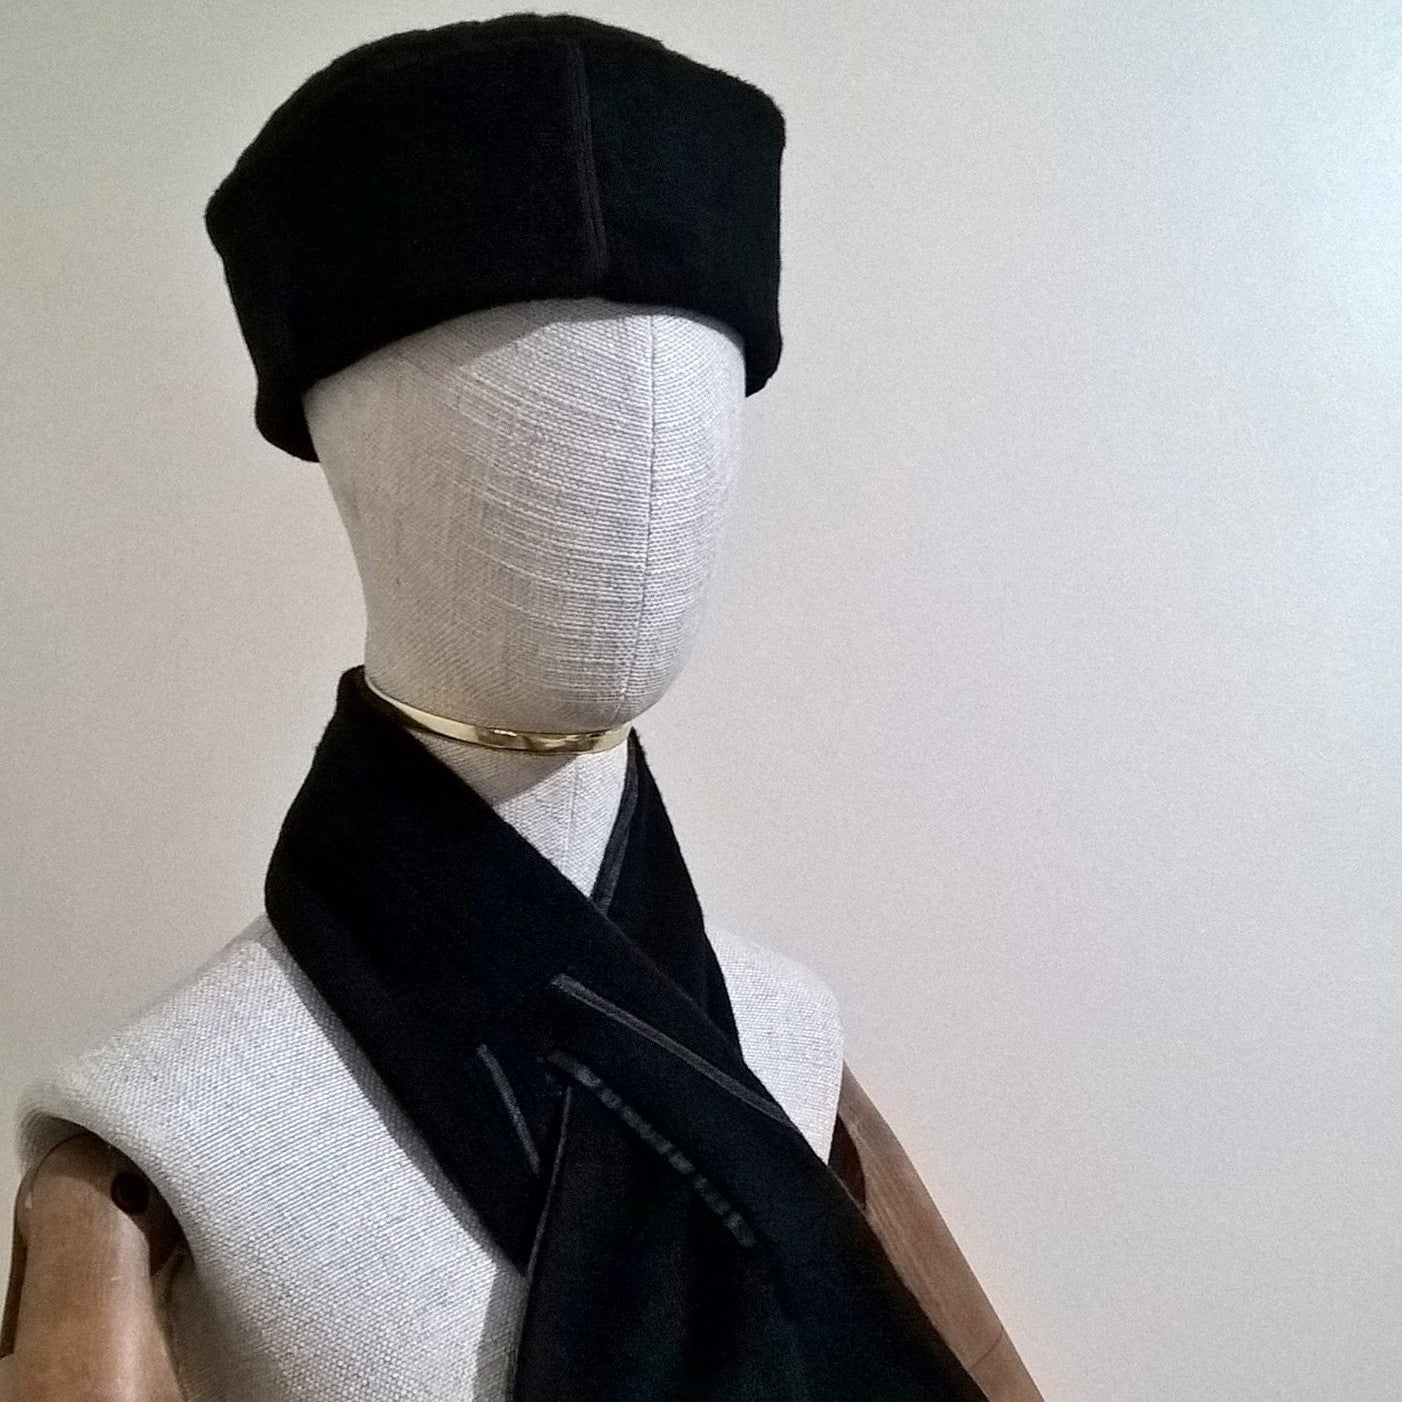 Black cashmere hat with matching scarf cravat